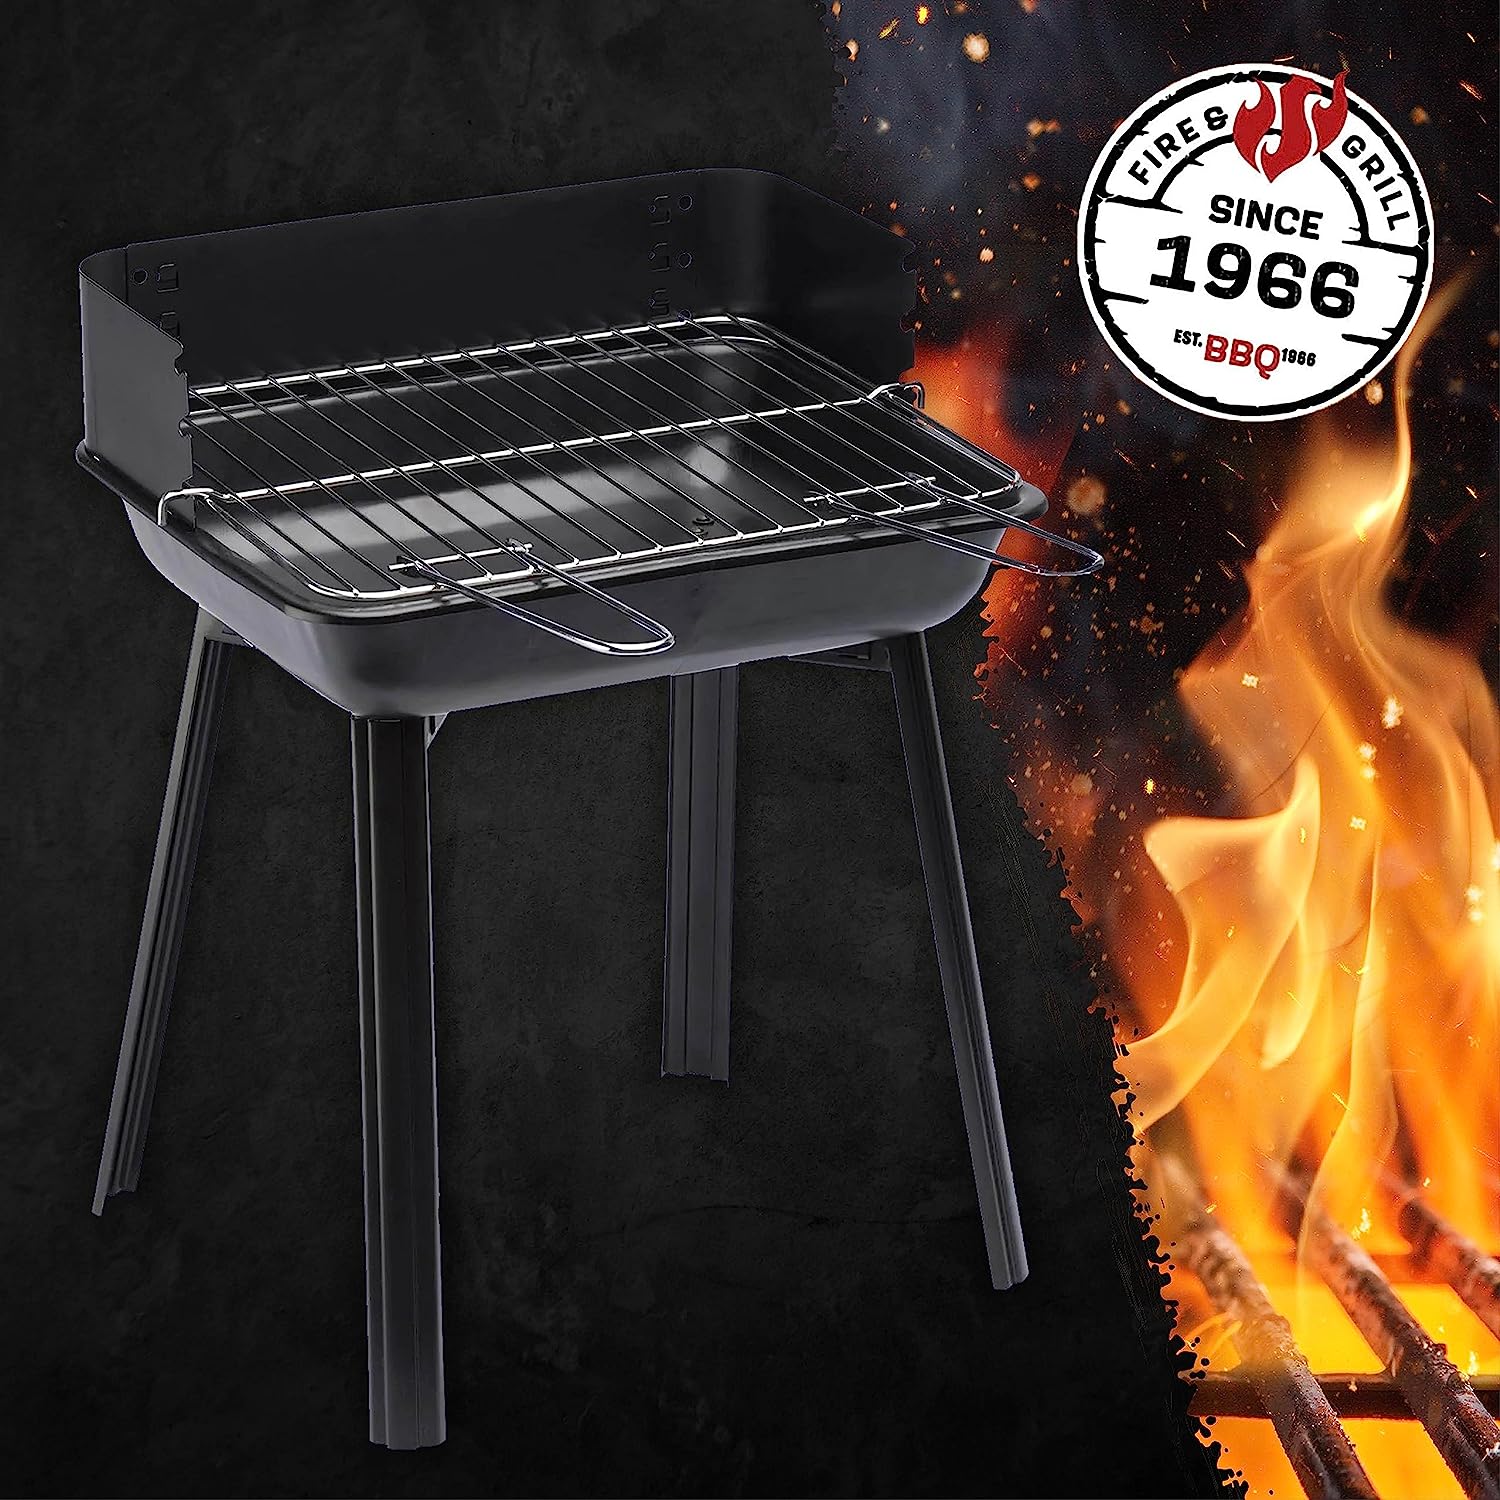 Landmann Porta-Go Charcoal Barbecue black, small Compact and Portable occasional BBQ